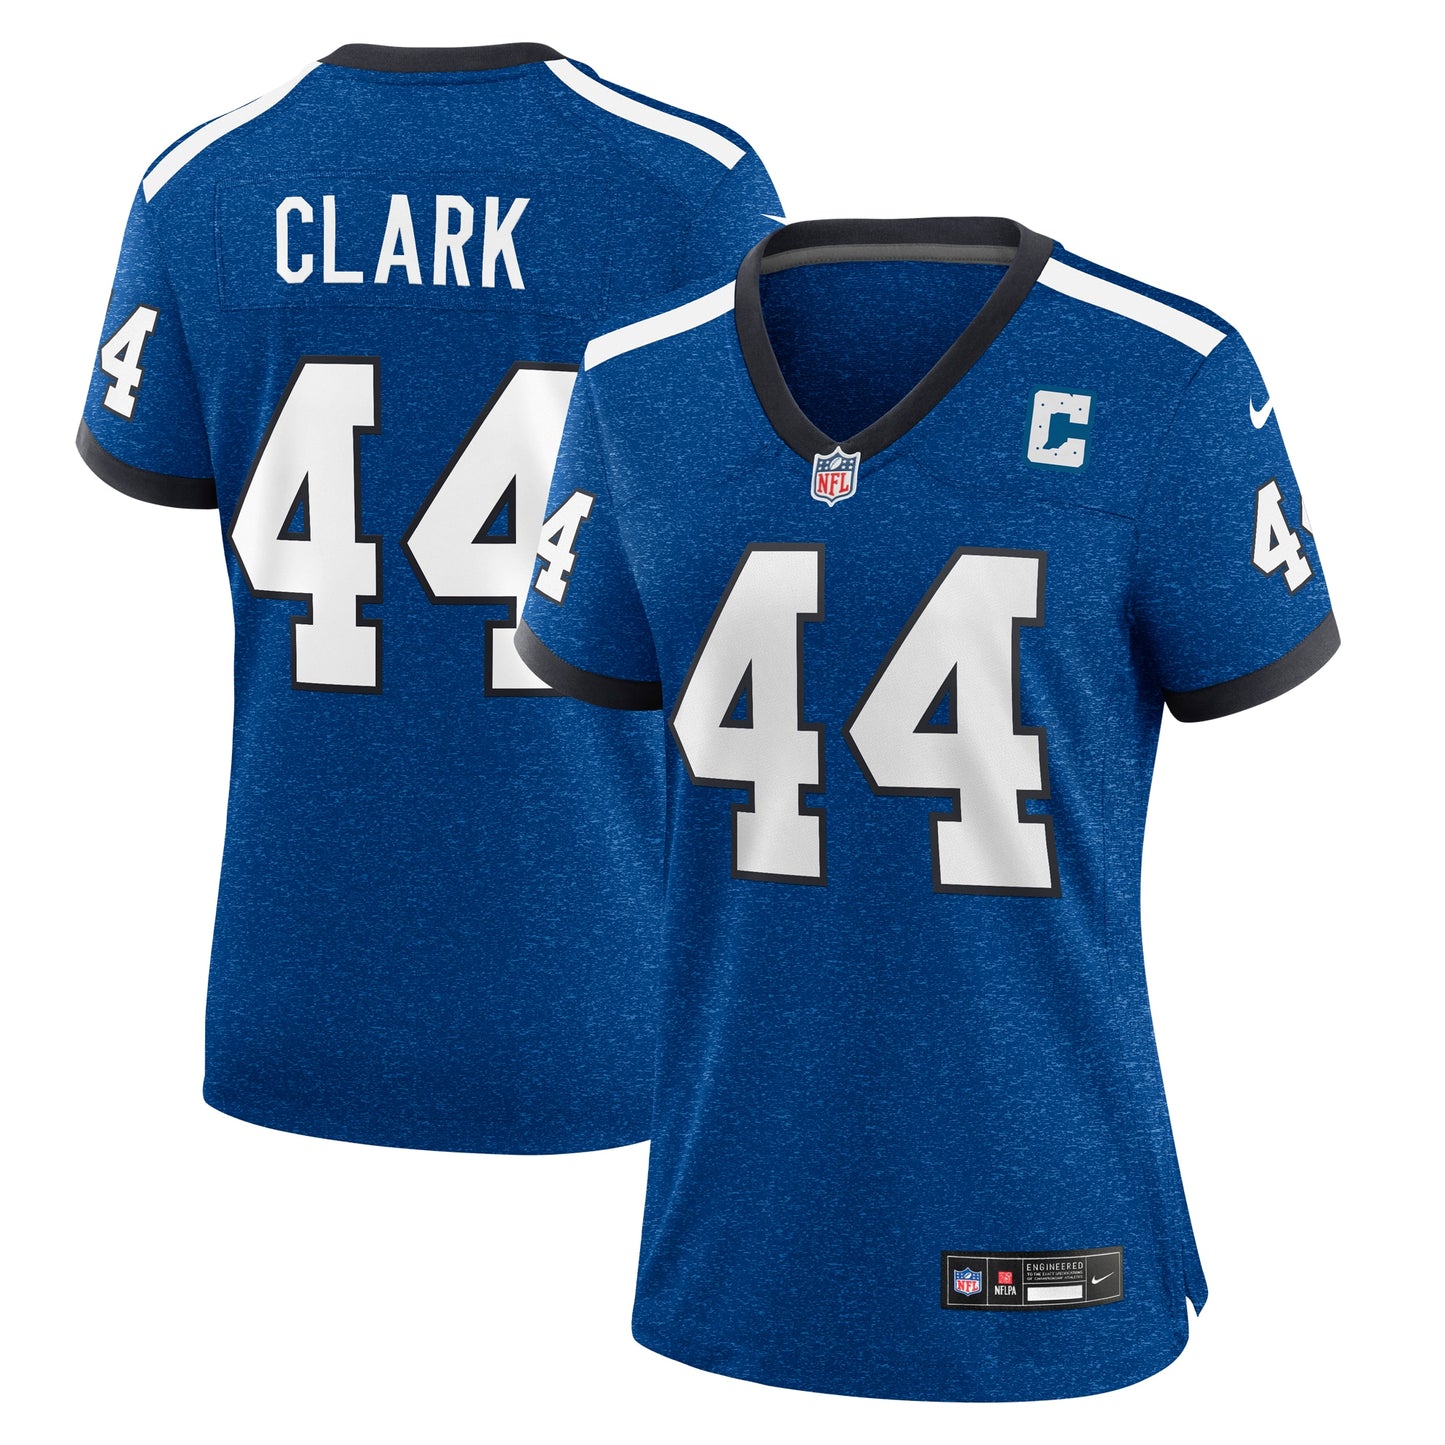 Dallas Clark Indianapolis Colts Nike Women's Indiana Nights Alternate Game Jersey - Royal